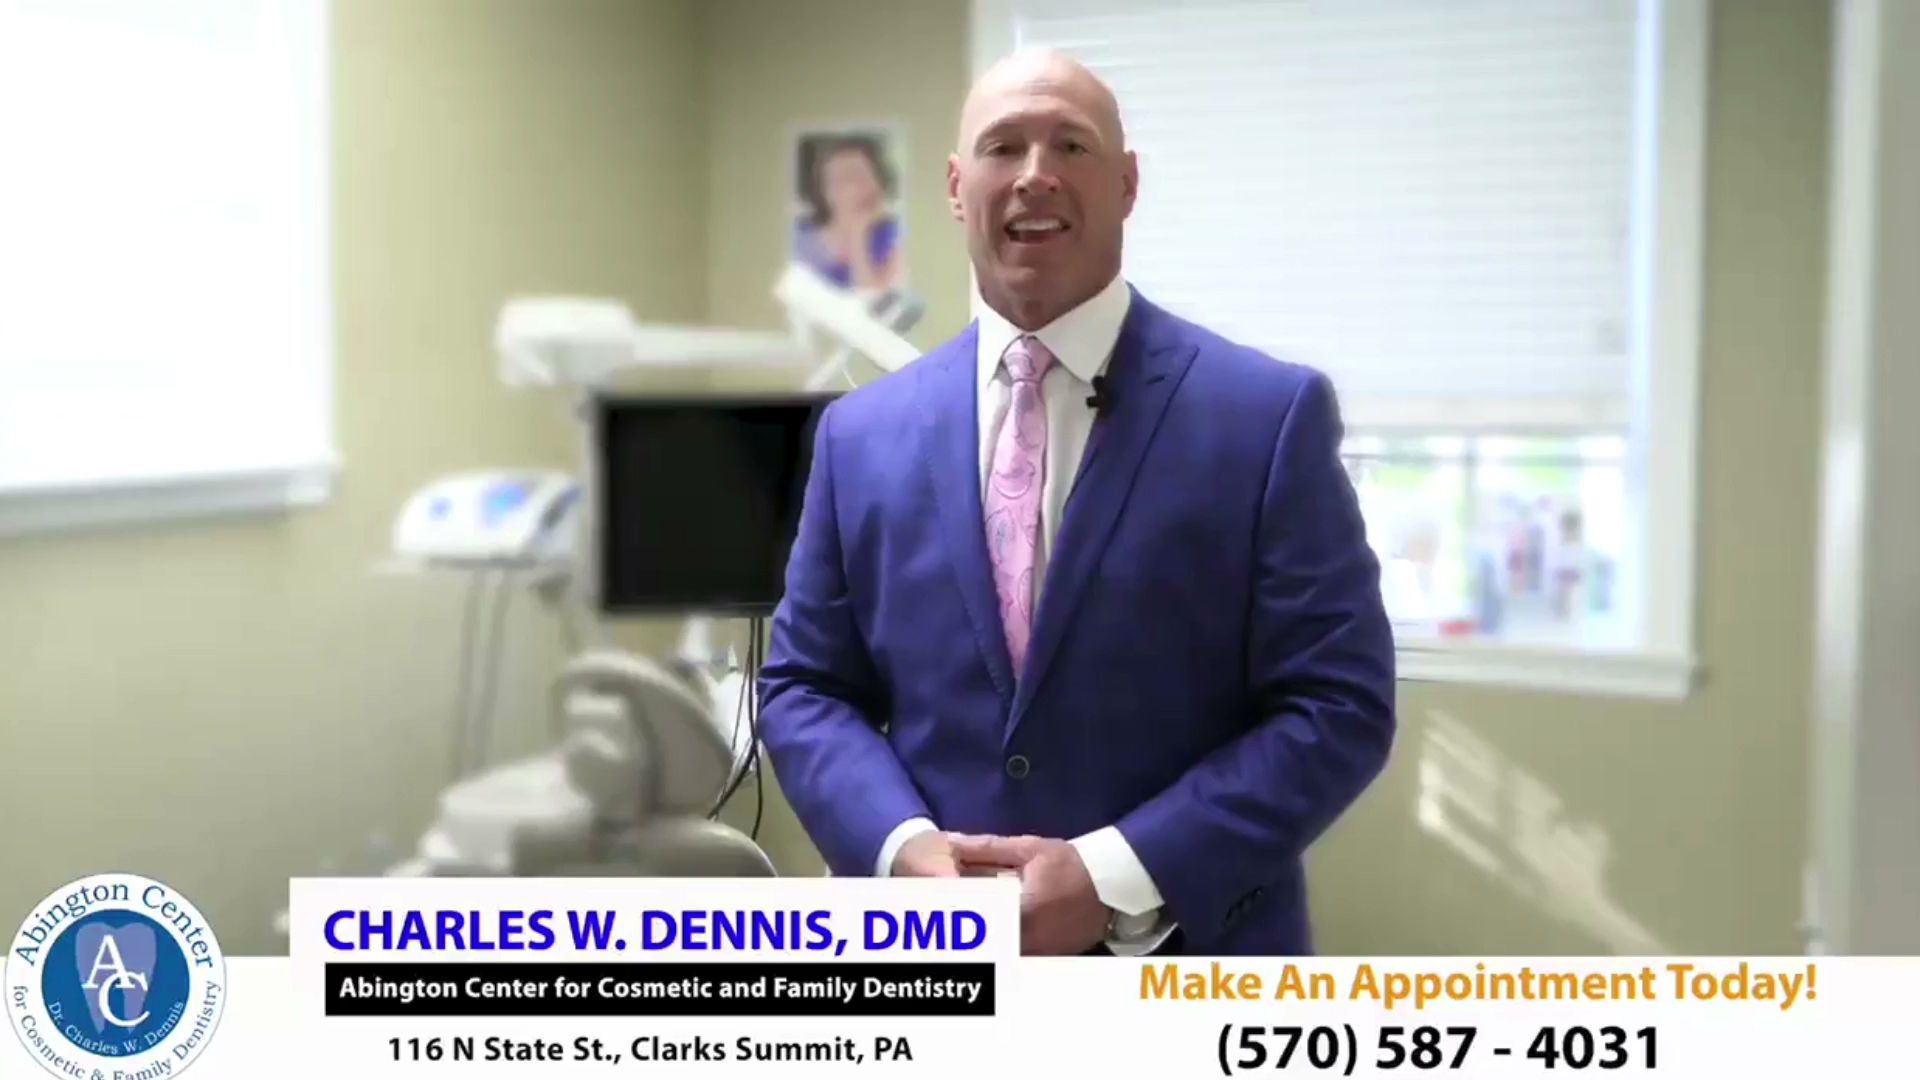 Abington Center for Cosmetic and Family Dentistry: Charles Dennis, DMD